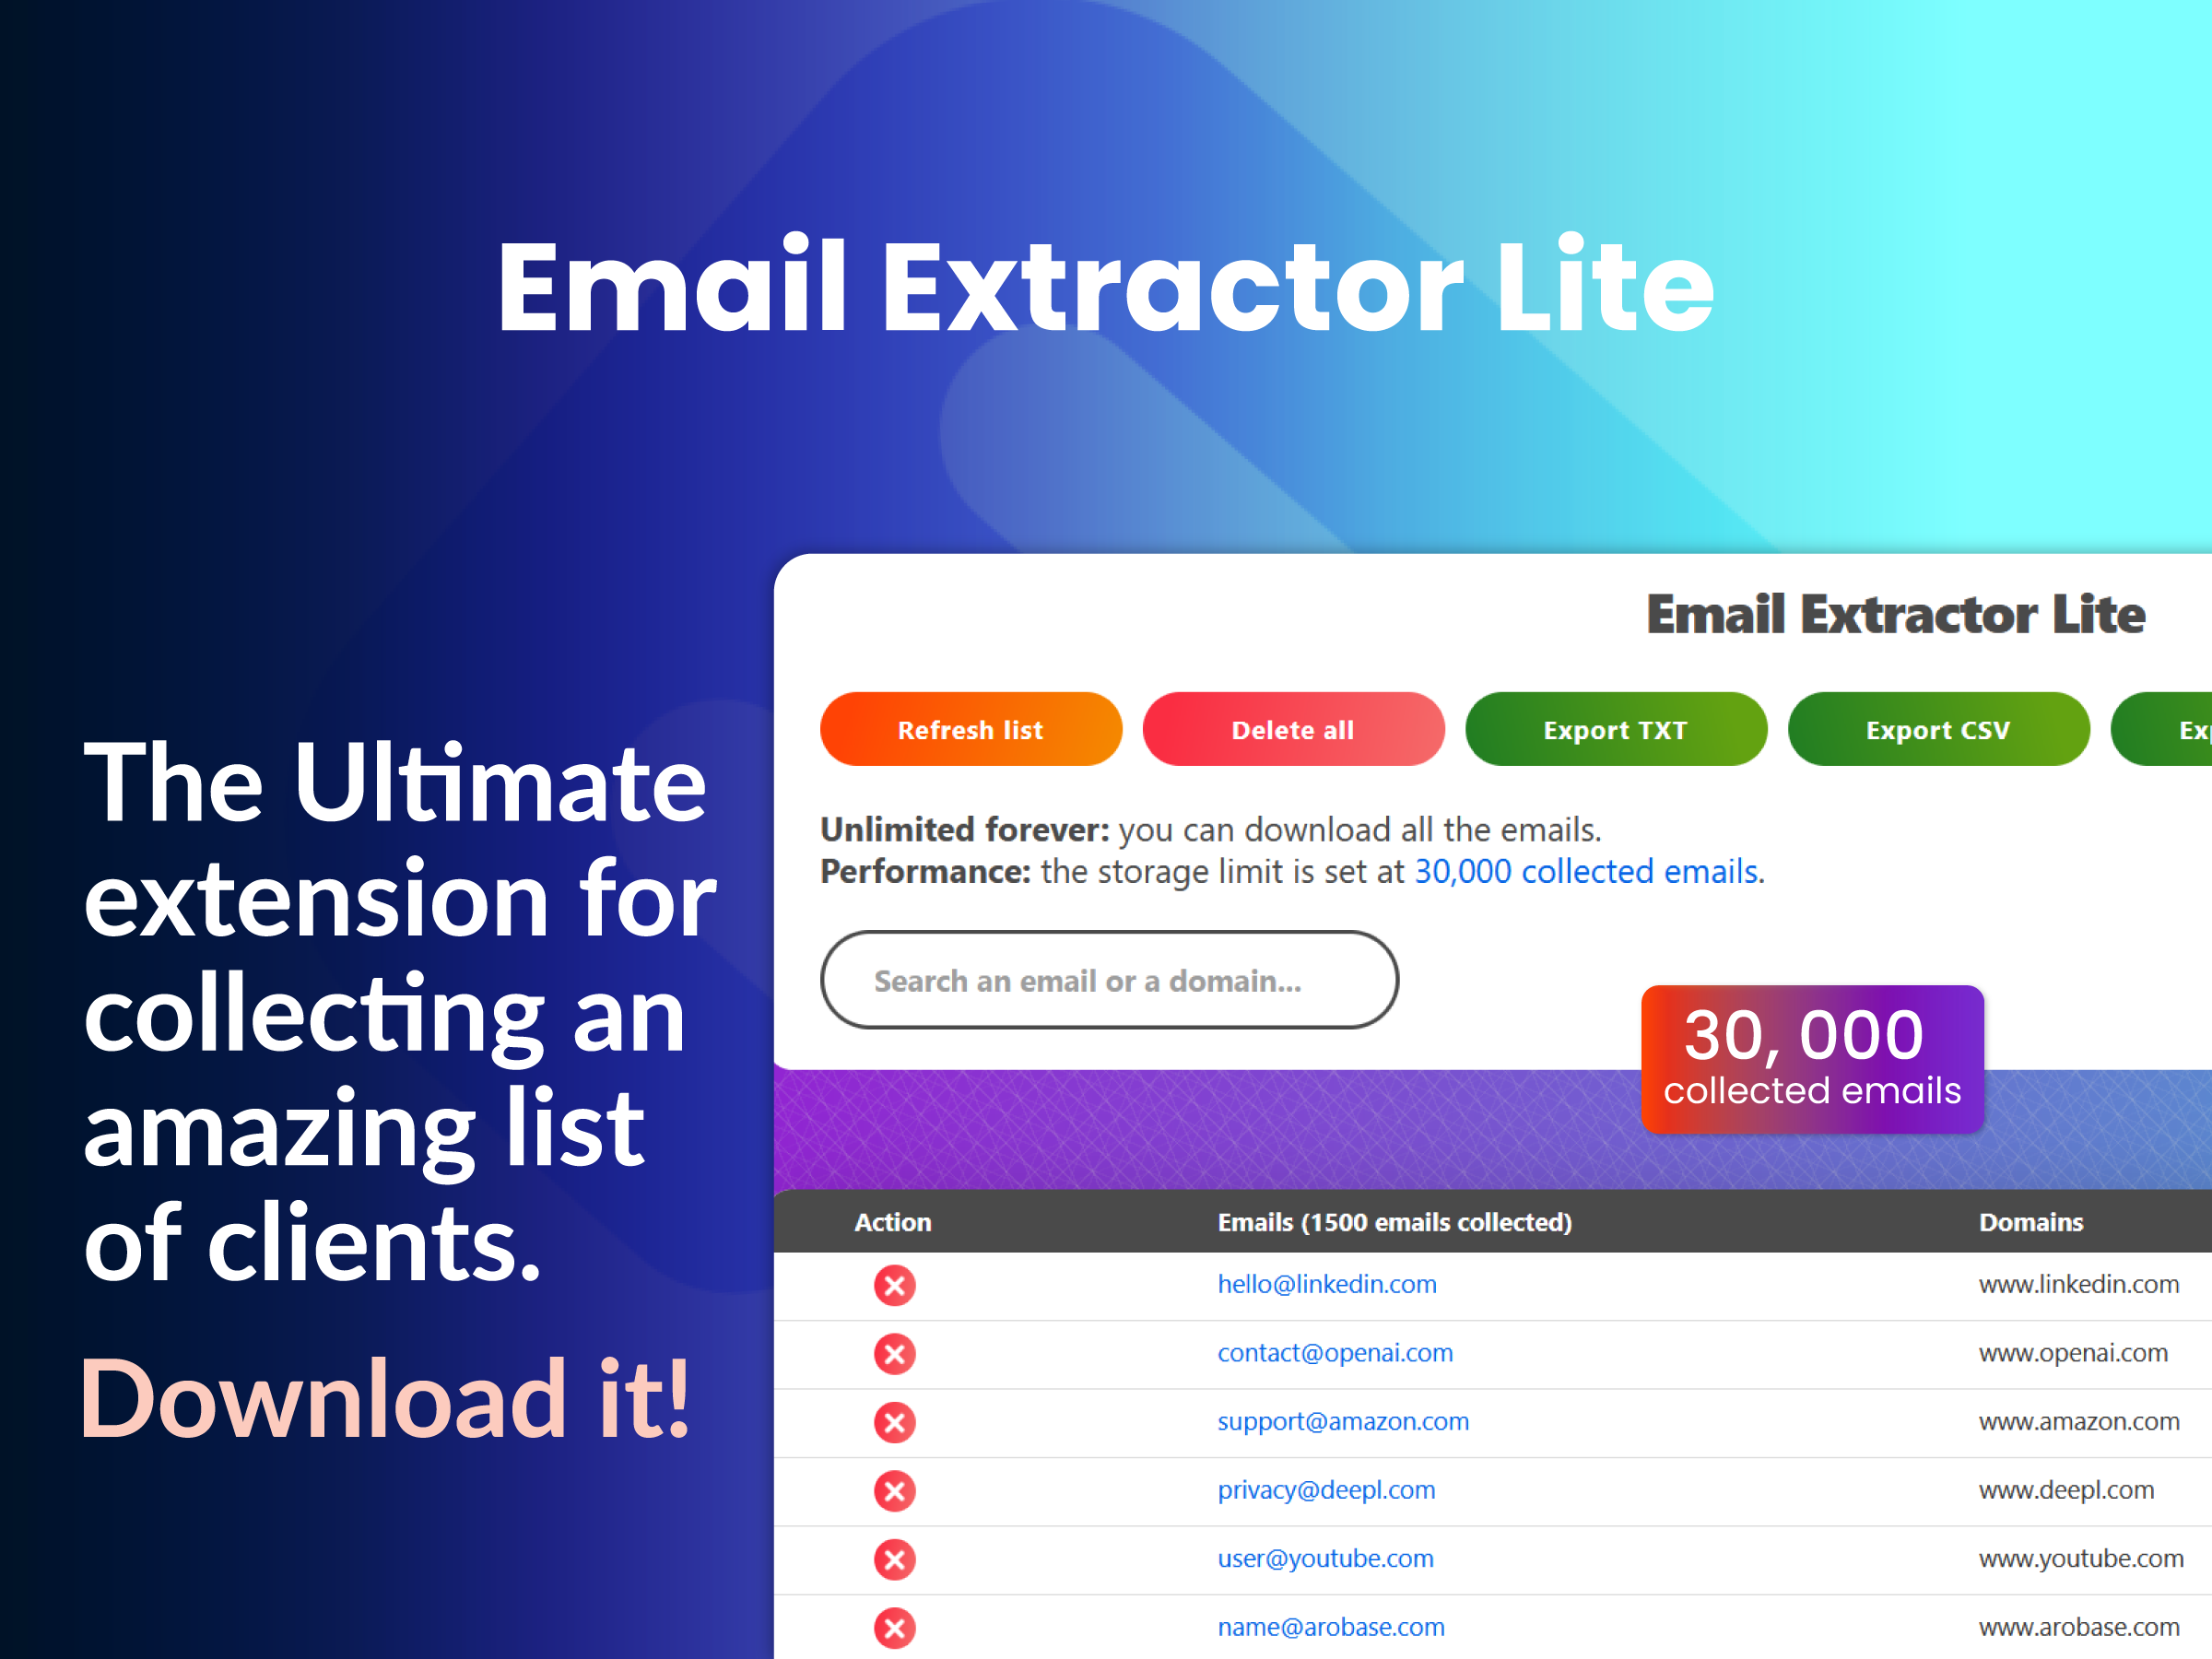 Email Extractor Lite promo image